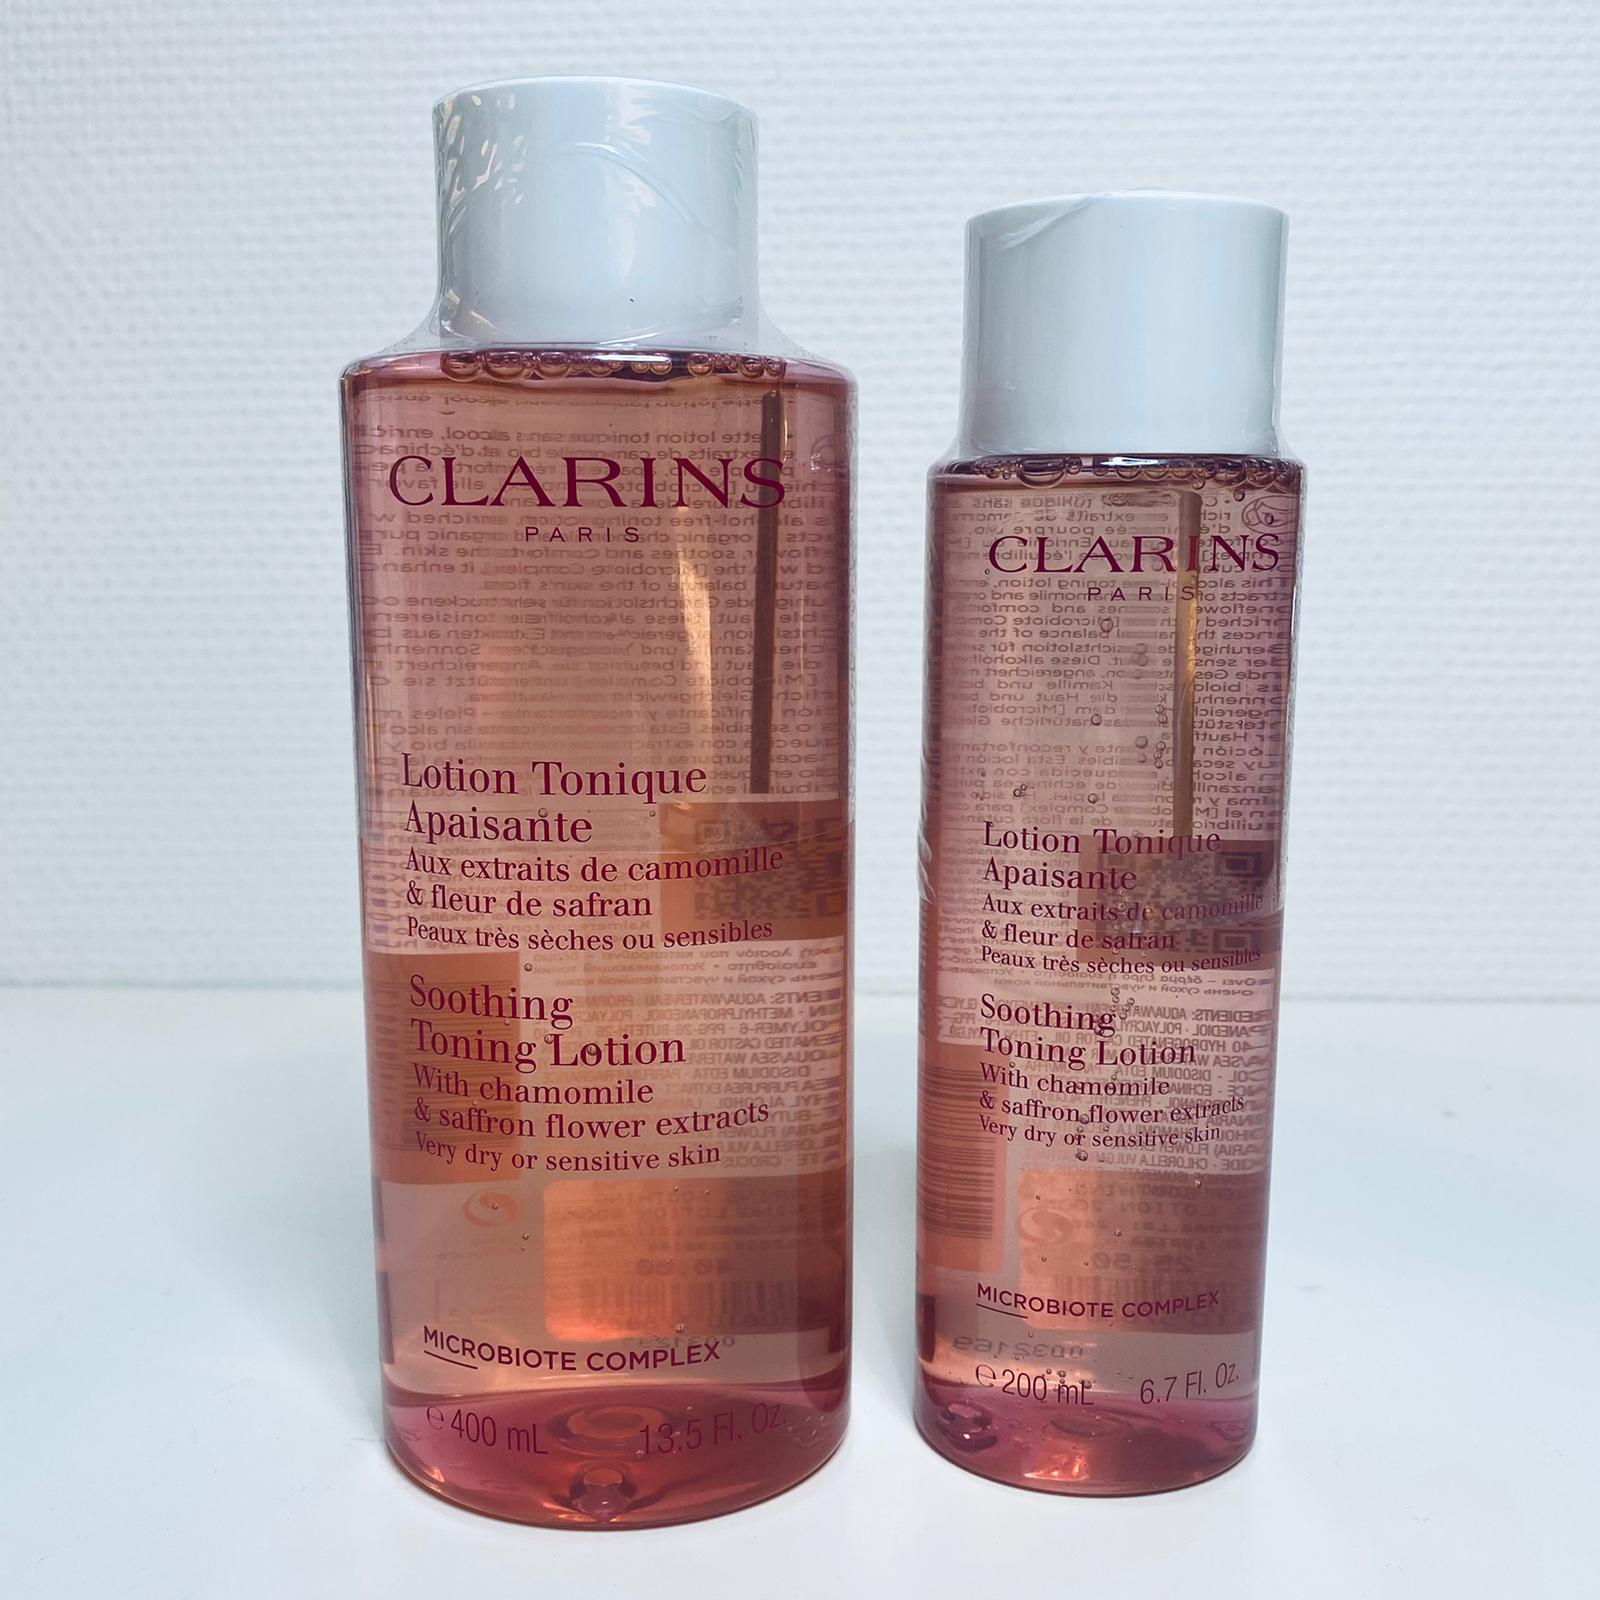 Clarins sooting toning lotion very dry or sensitive skin 200 ml